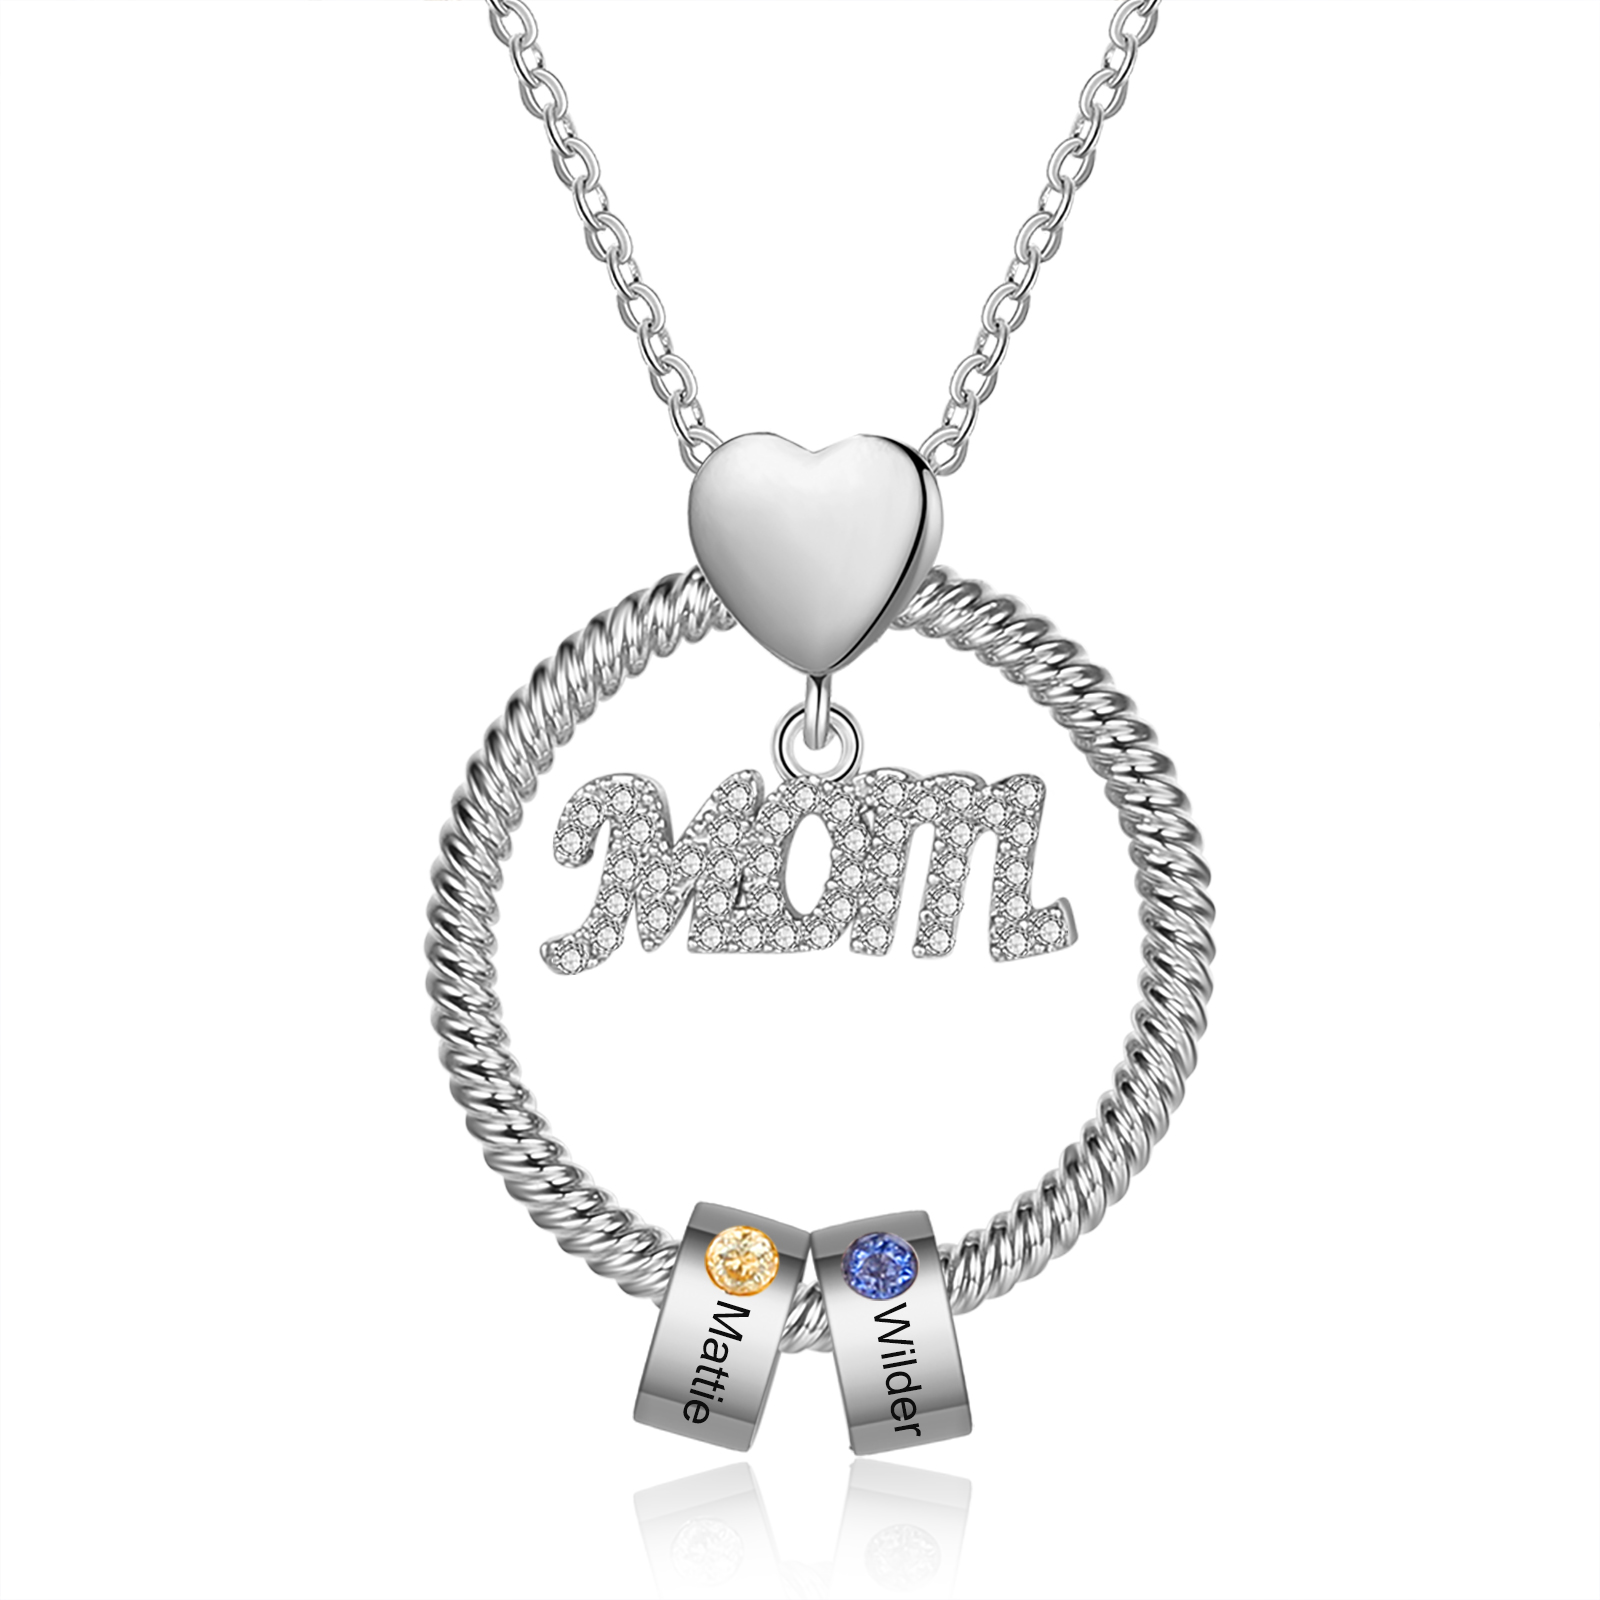 Personalized Necklace With 2 Birthstones Engraved Names Gift For Mother